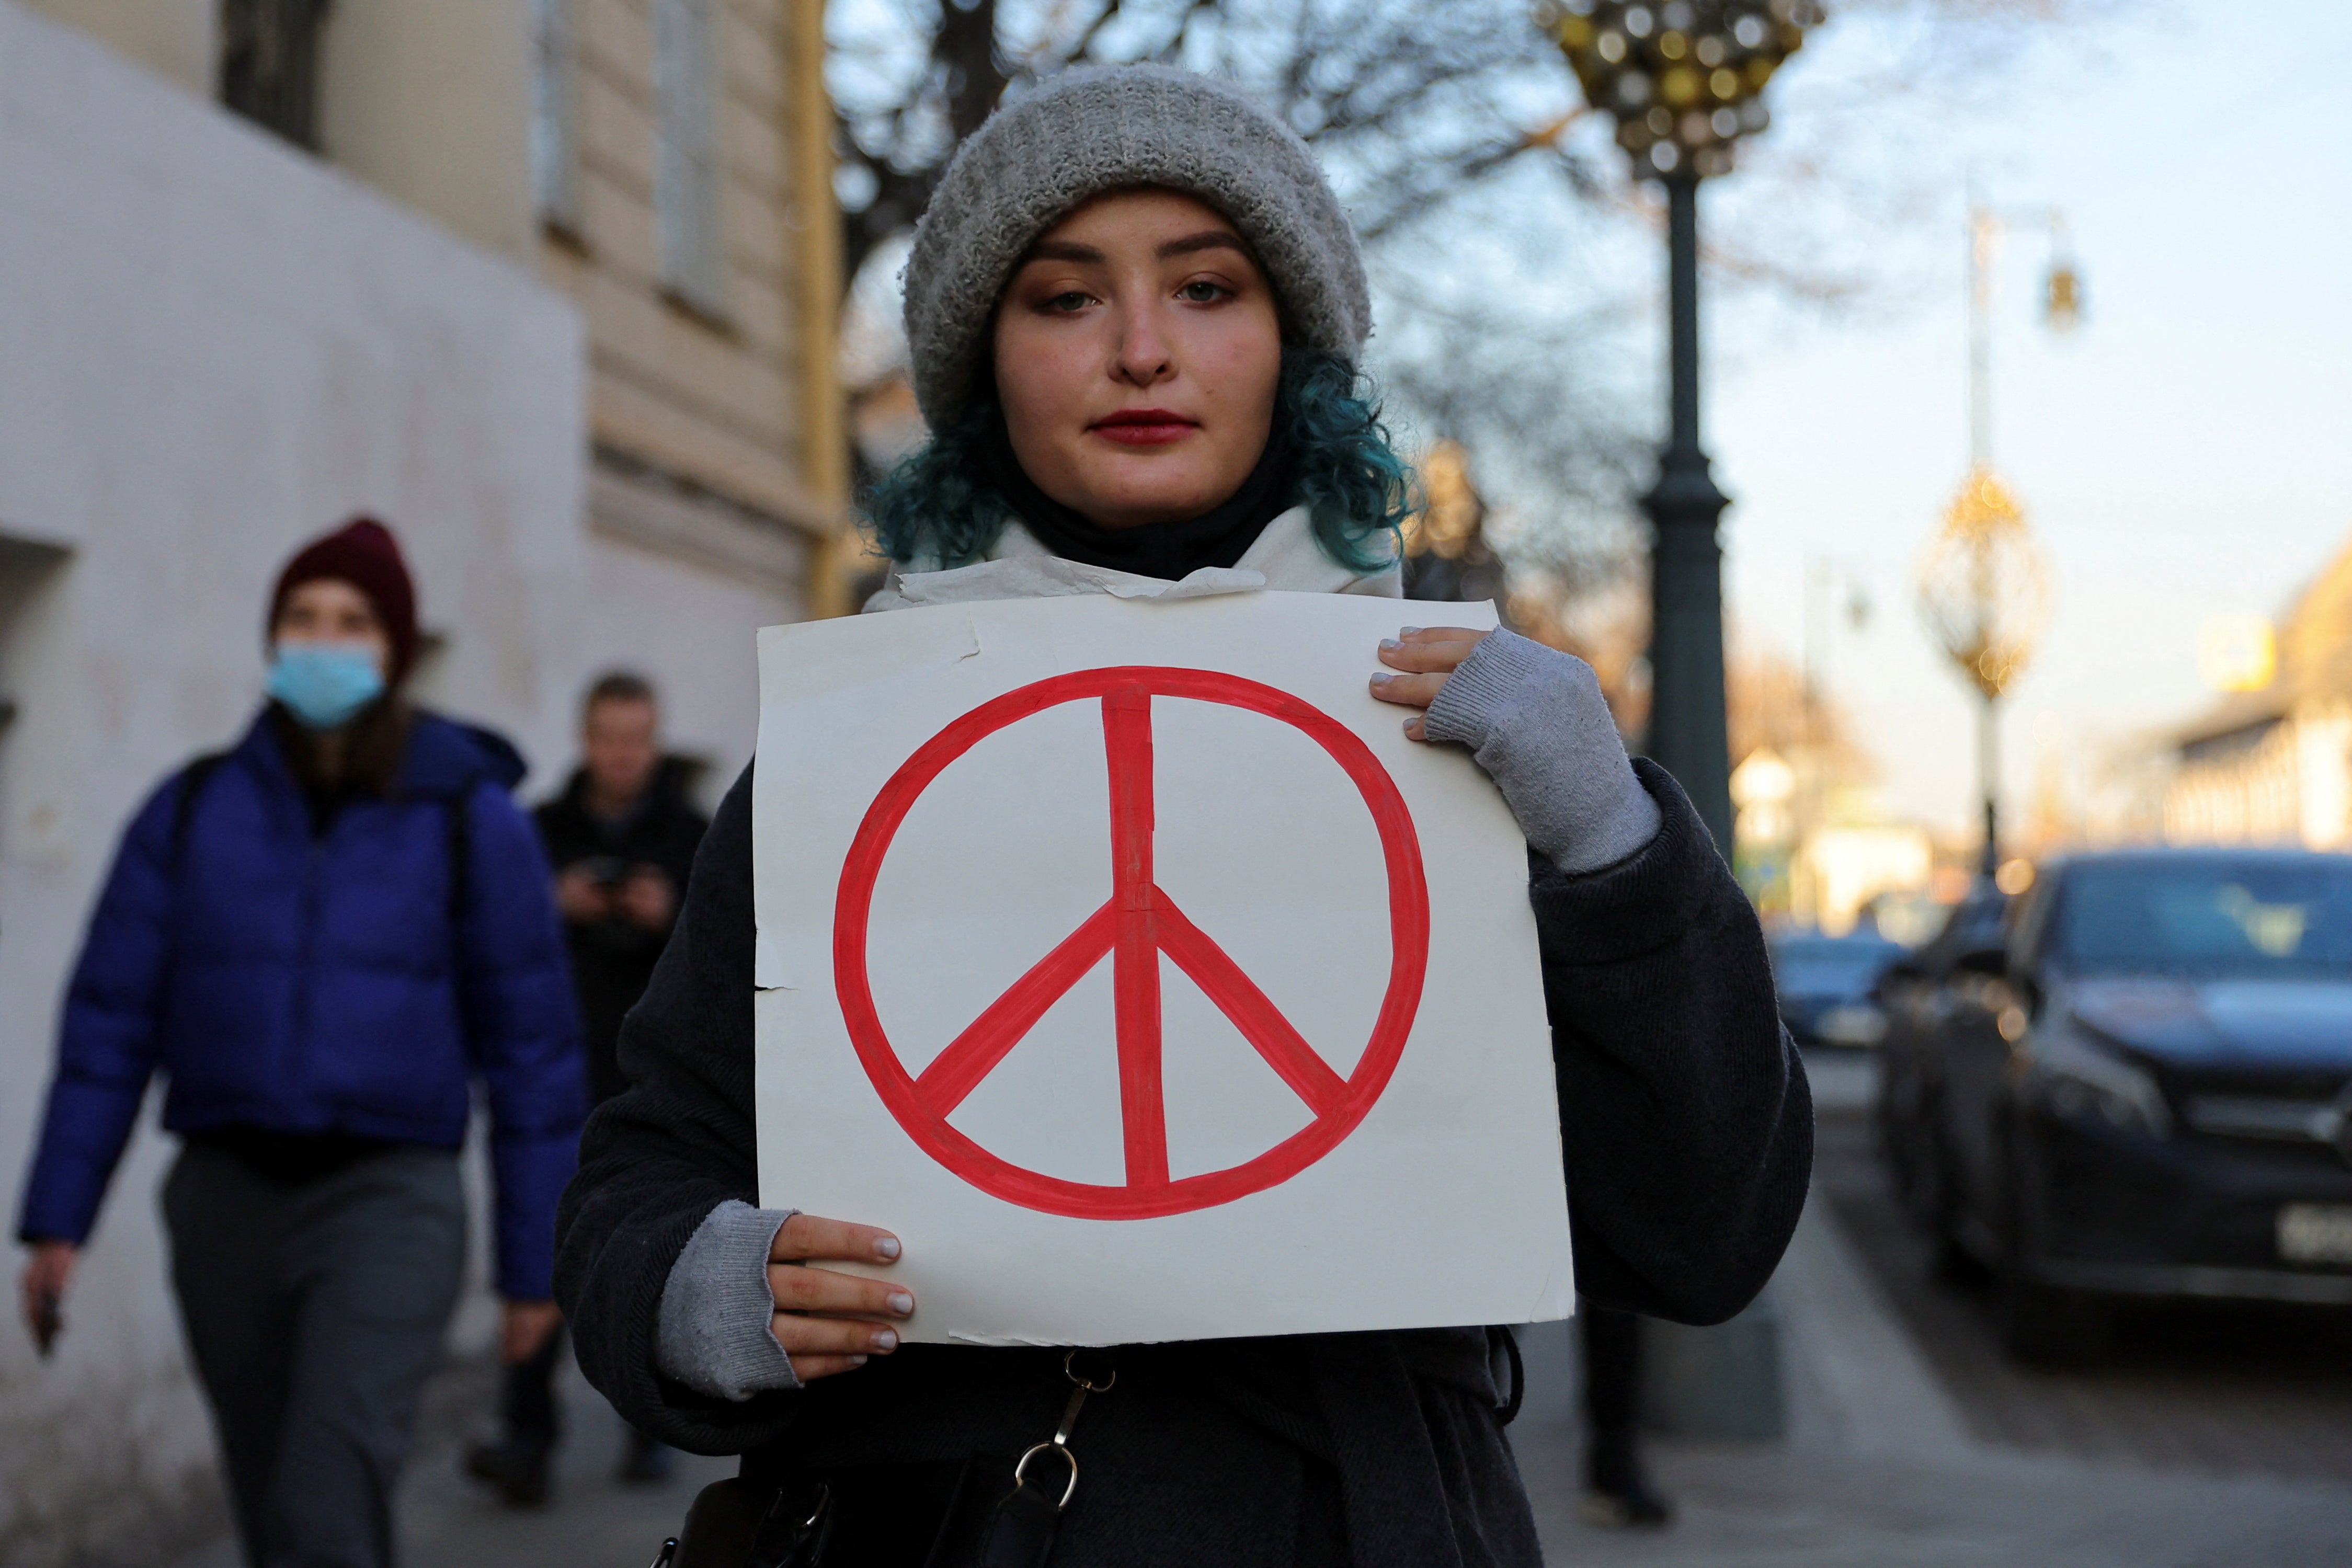 A person holds a sign during a protest against Russian invasion of Ukraine, after President Vladimir Putin authorised a massive military operation, in Moscow, Russia February 27, 2022